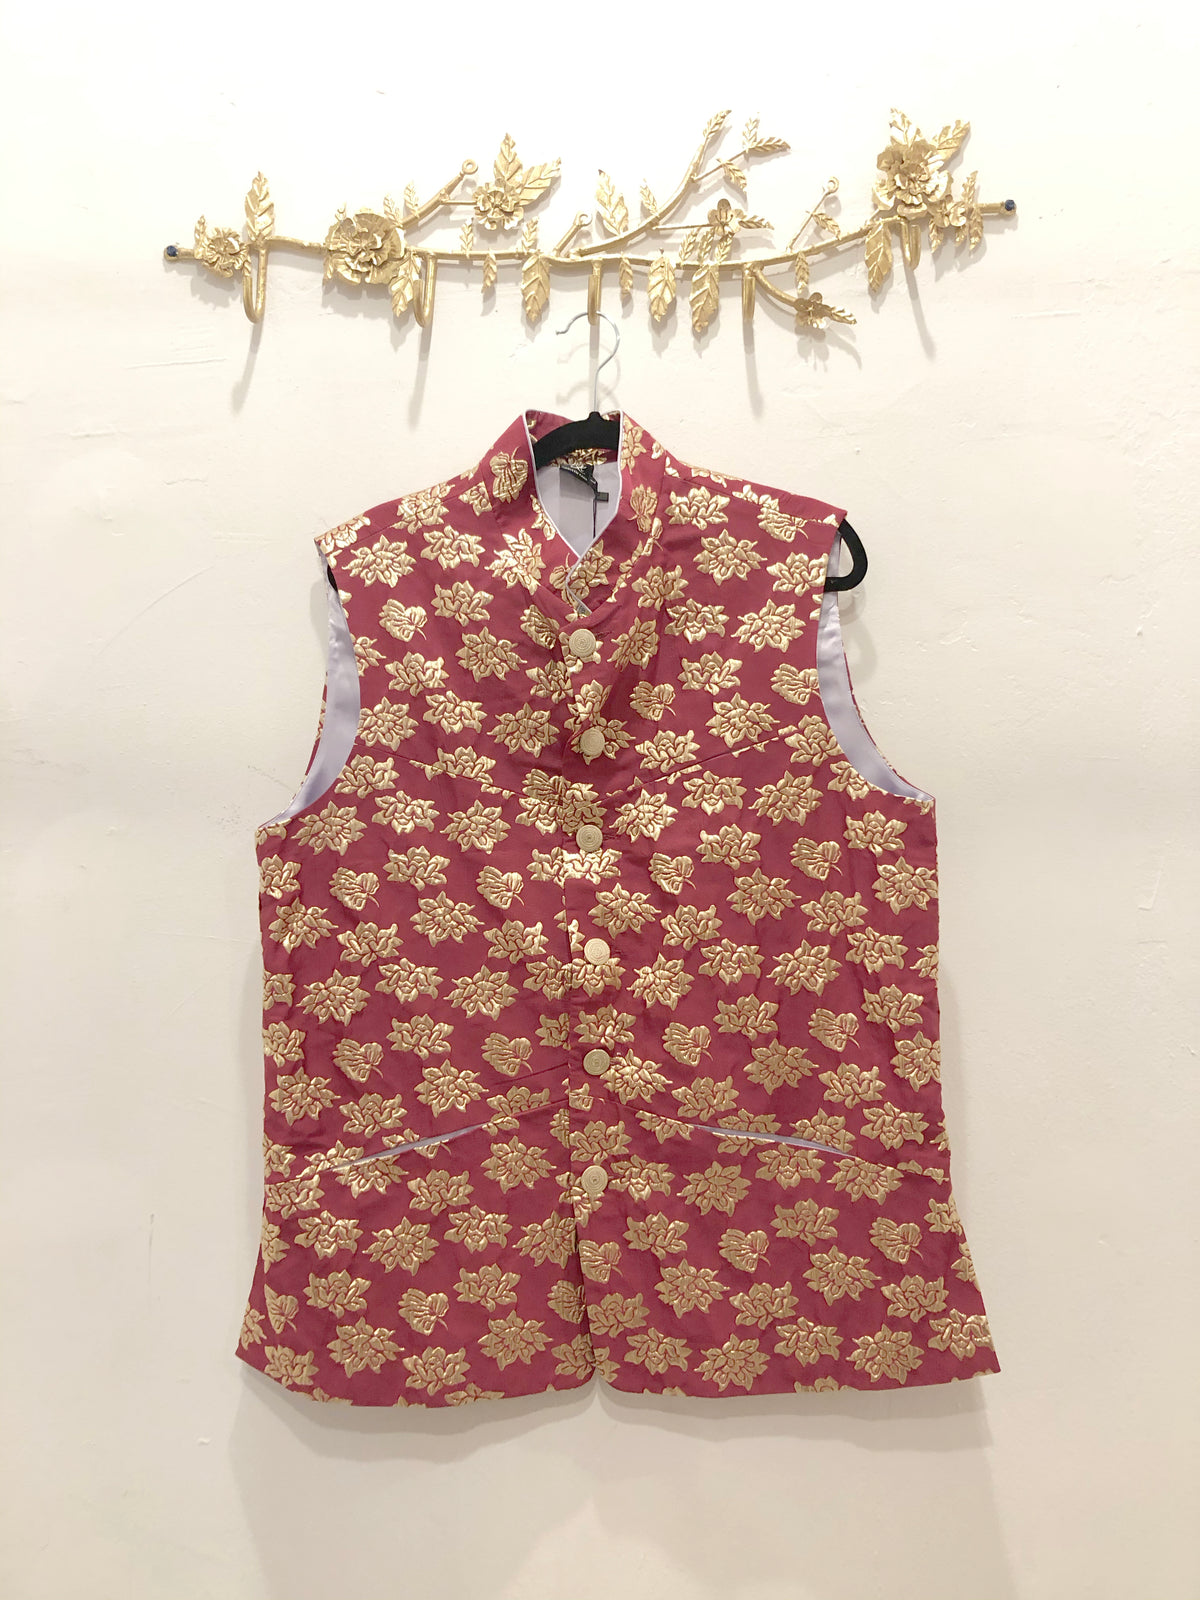 APA Berry and Gold Vest - Front View - Harleen Kaur Menswear - Sample Sale